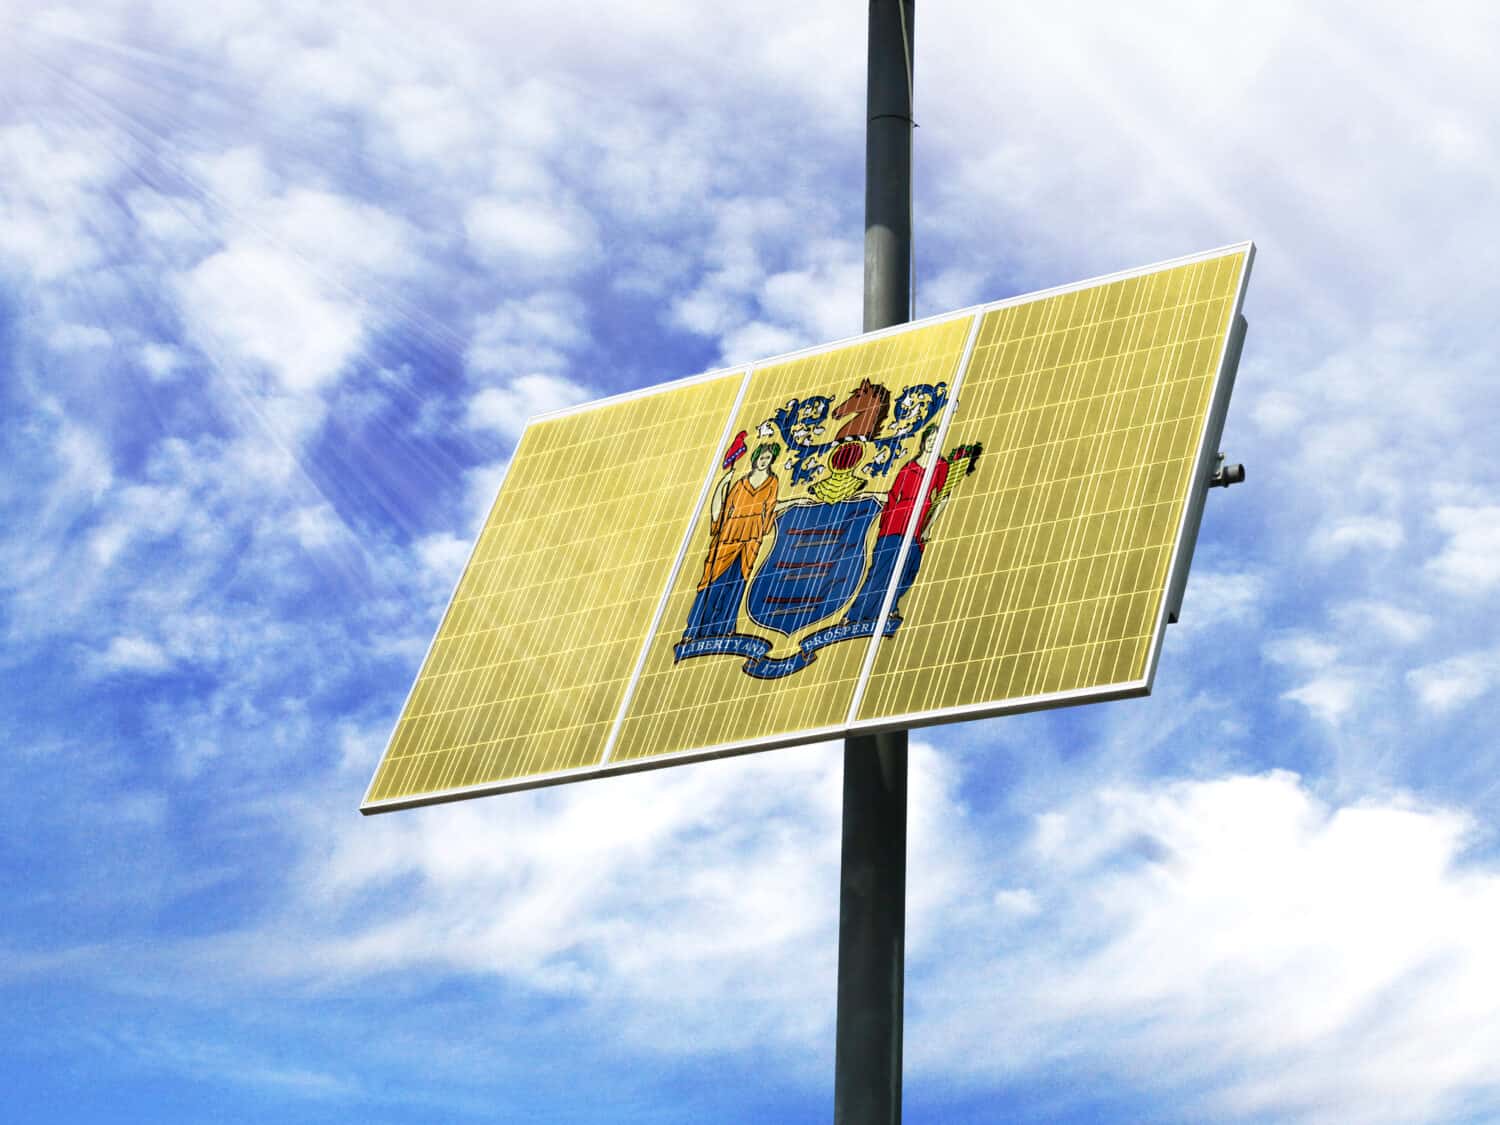 Solar panels against a blue sky with a picture of the flag State of New Jersey